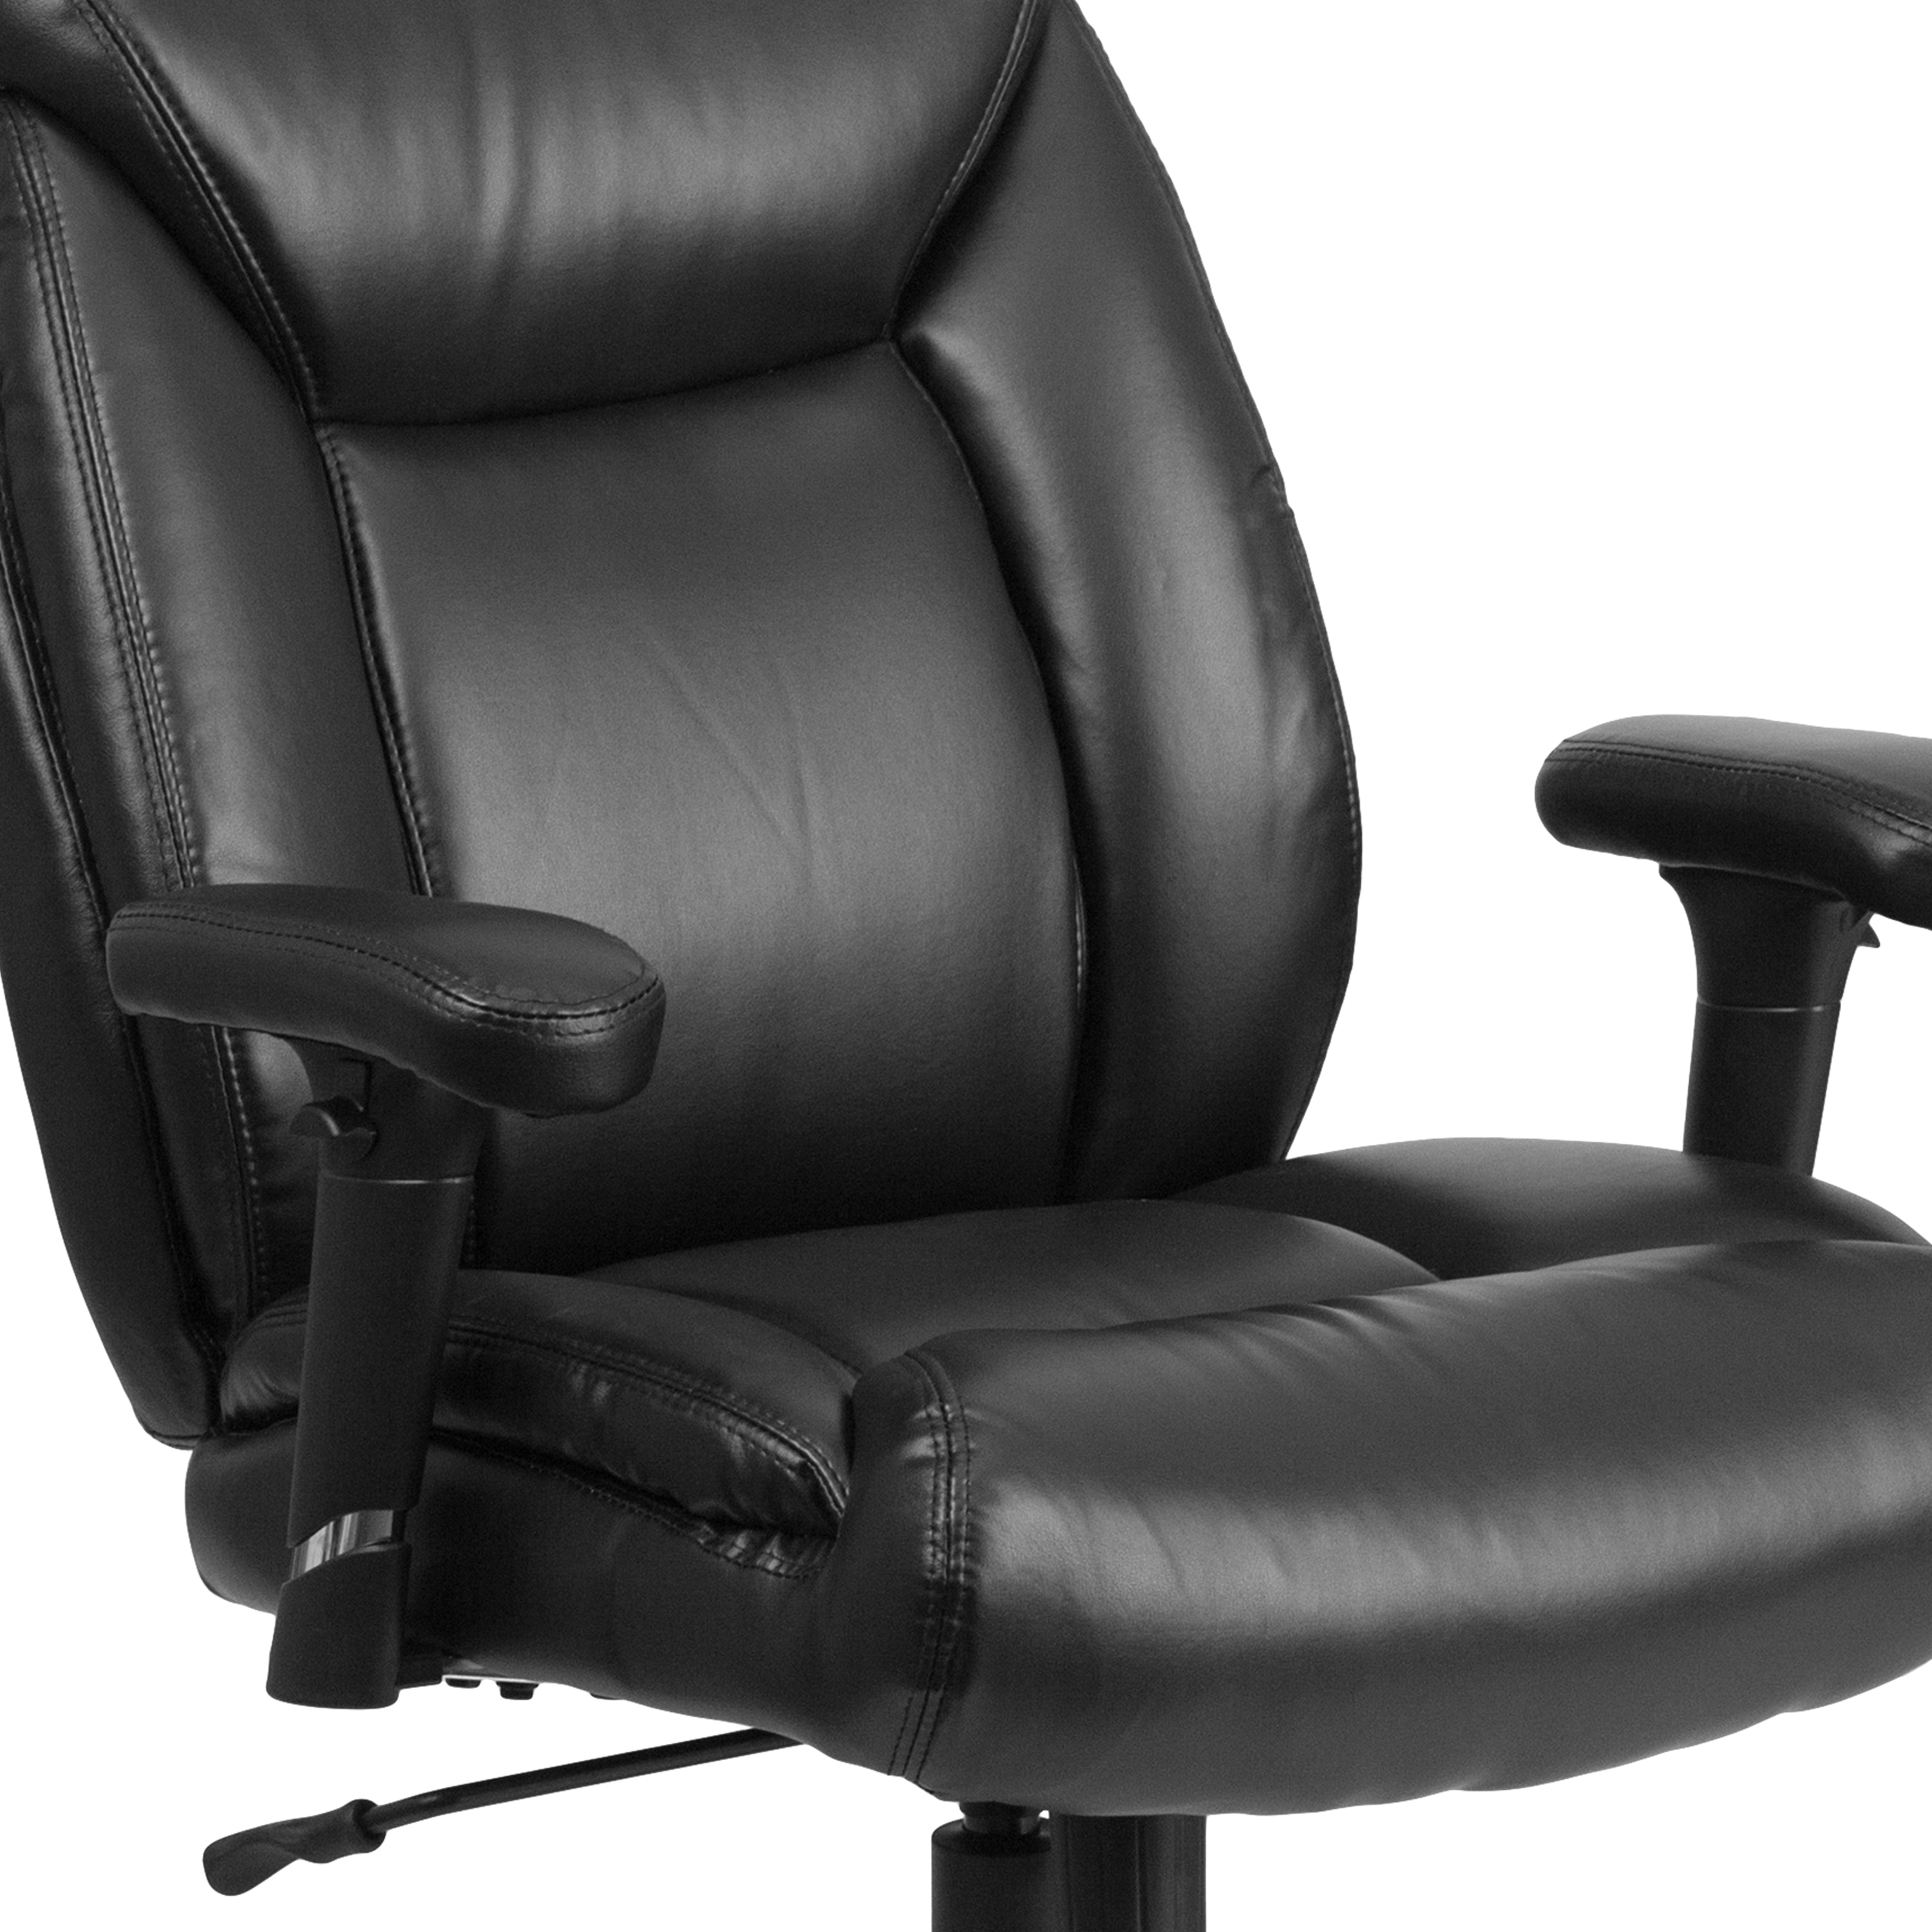 HERCULES Series Big & Tall 400 lb. Rated Swivel Ergonomic Task Office Chair with Deep Tufted Seating and Adjustable Arms-Big & Tall Office Chair-Flash Furniture-Wall2Wall Furnishings